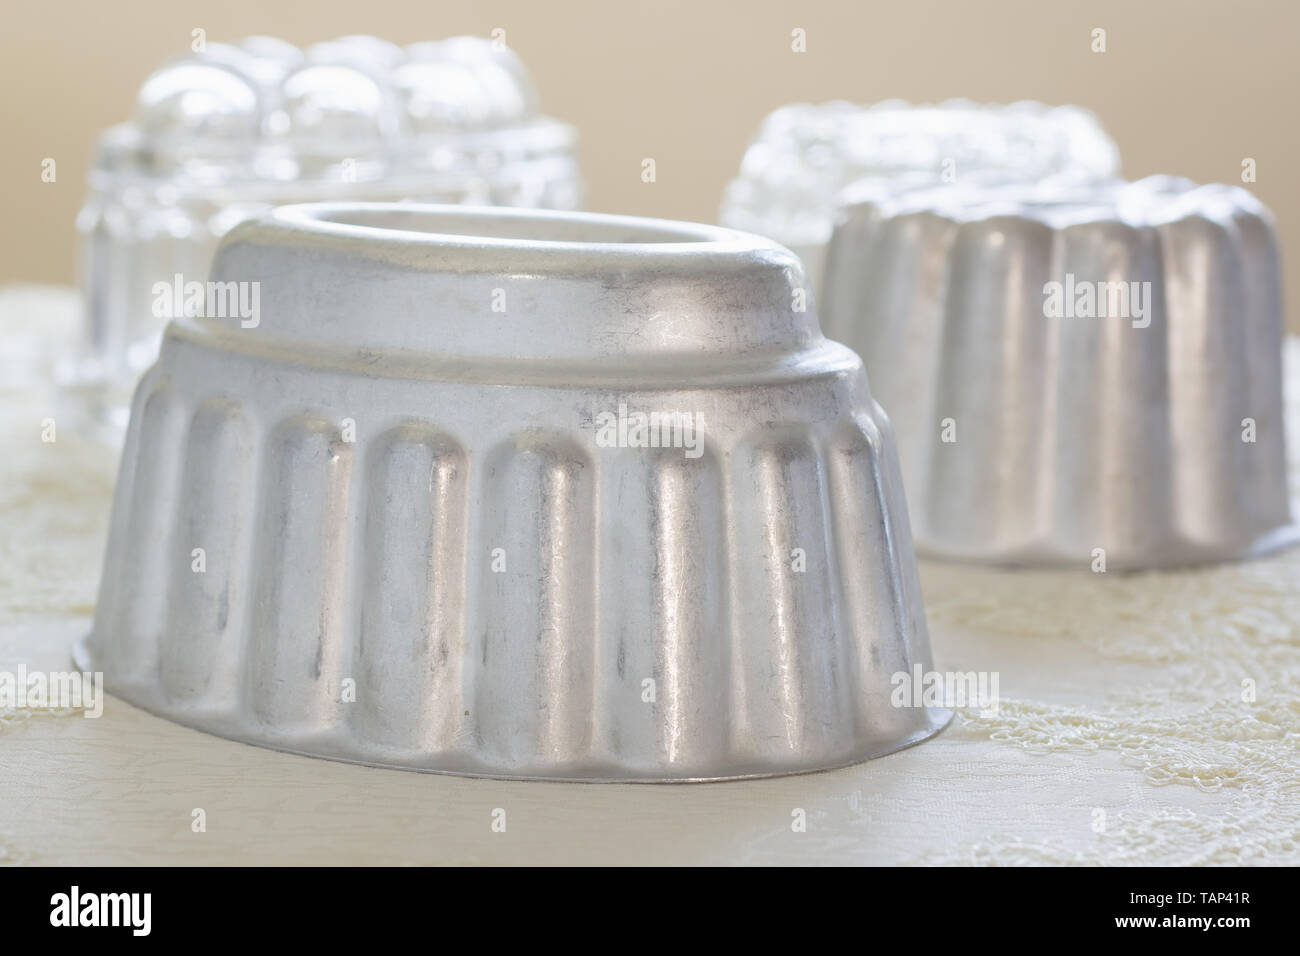 Vintage aluminum and glass jelly or blancmange moulds for making traditional jellies Stock Photo